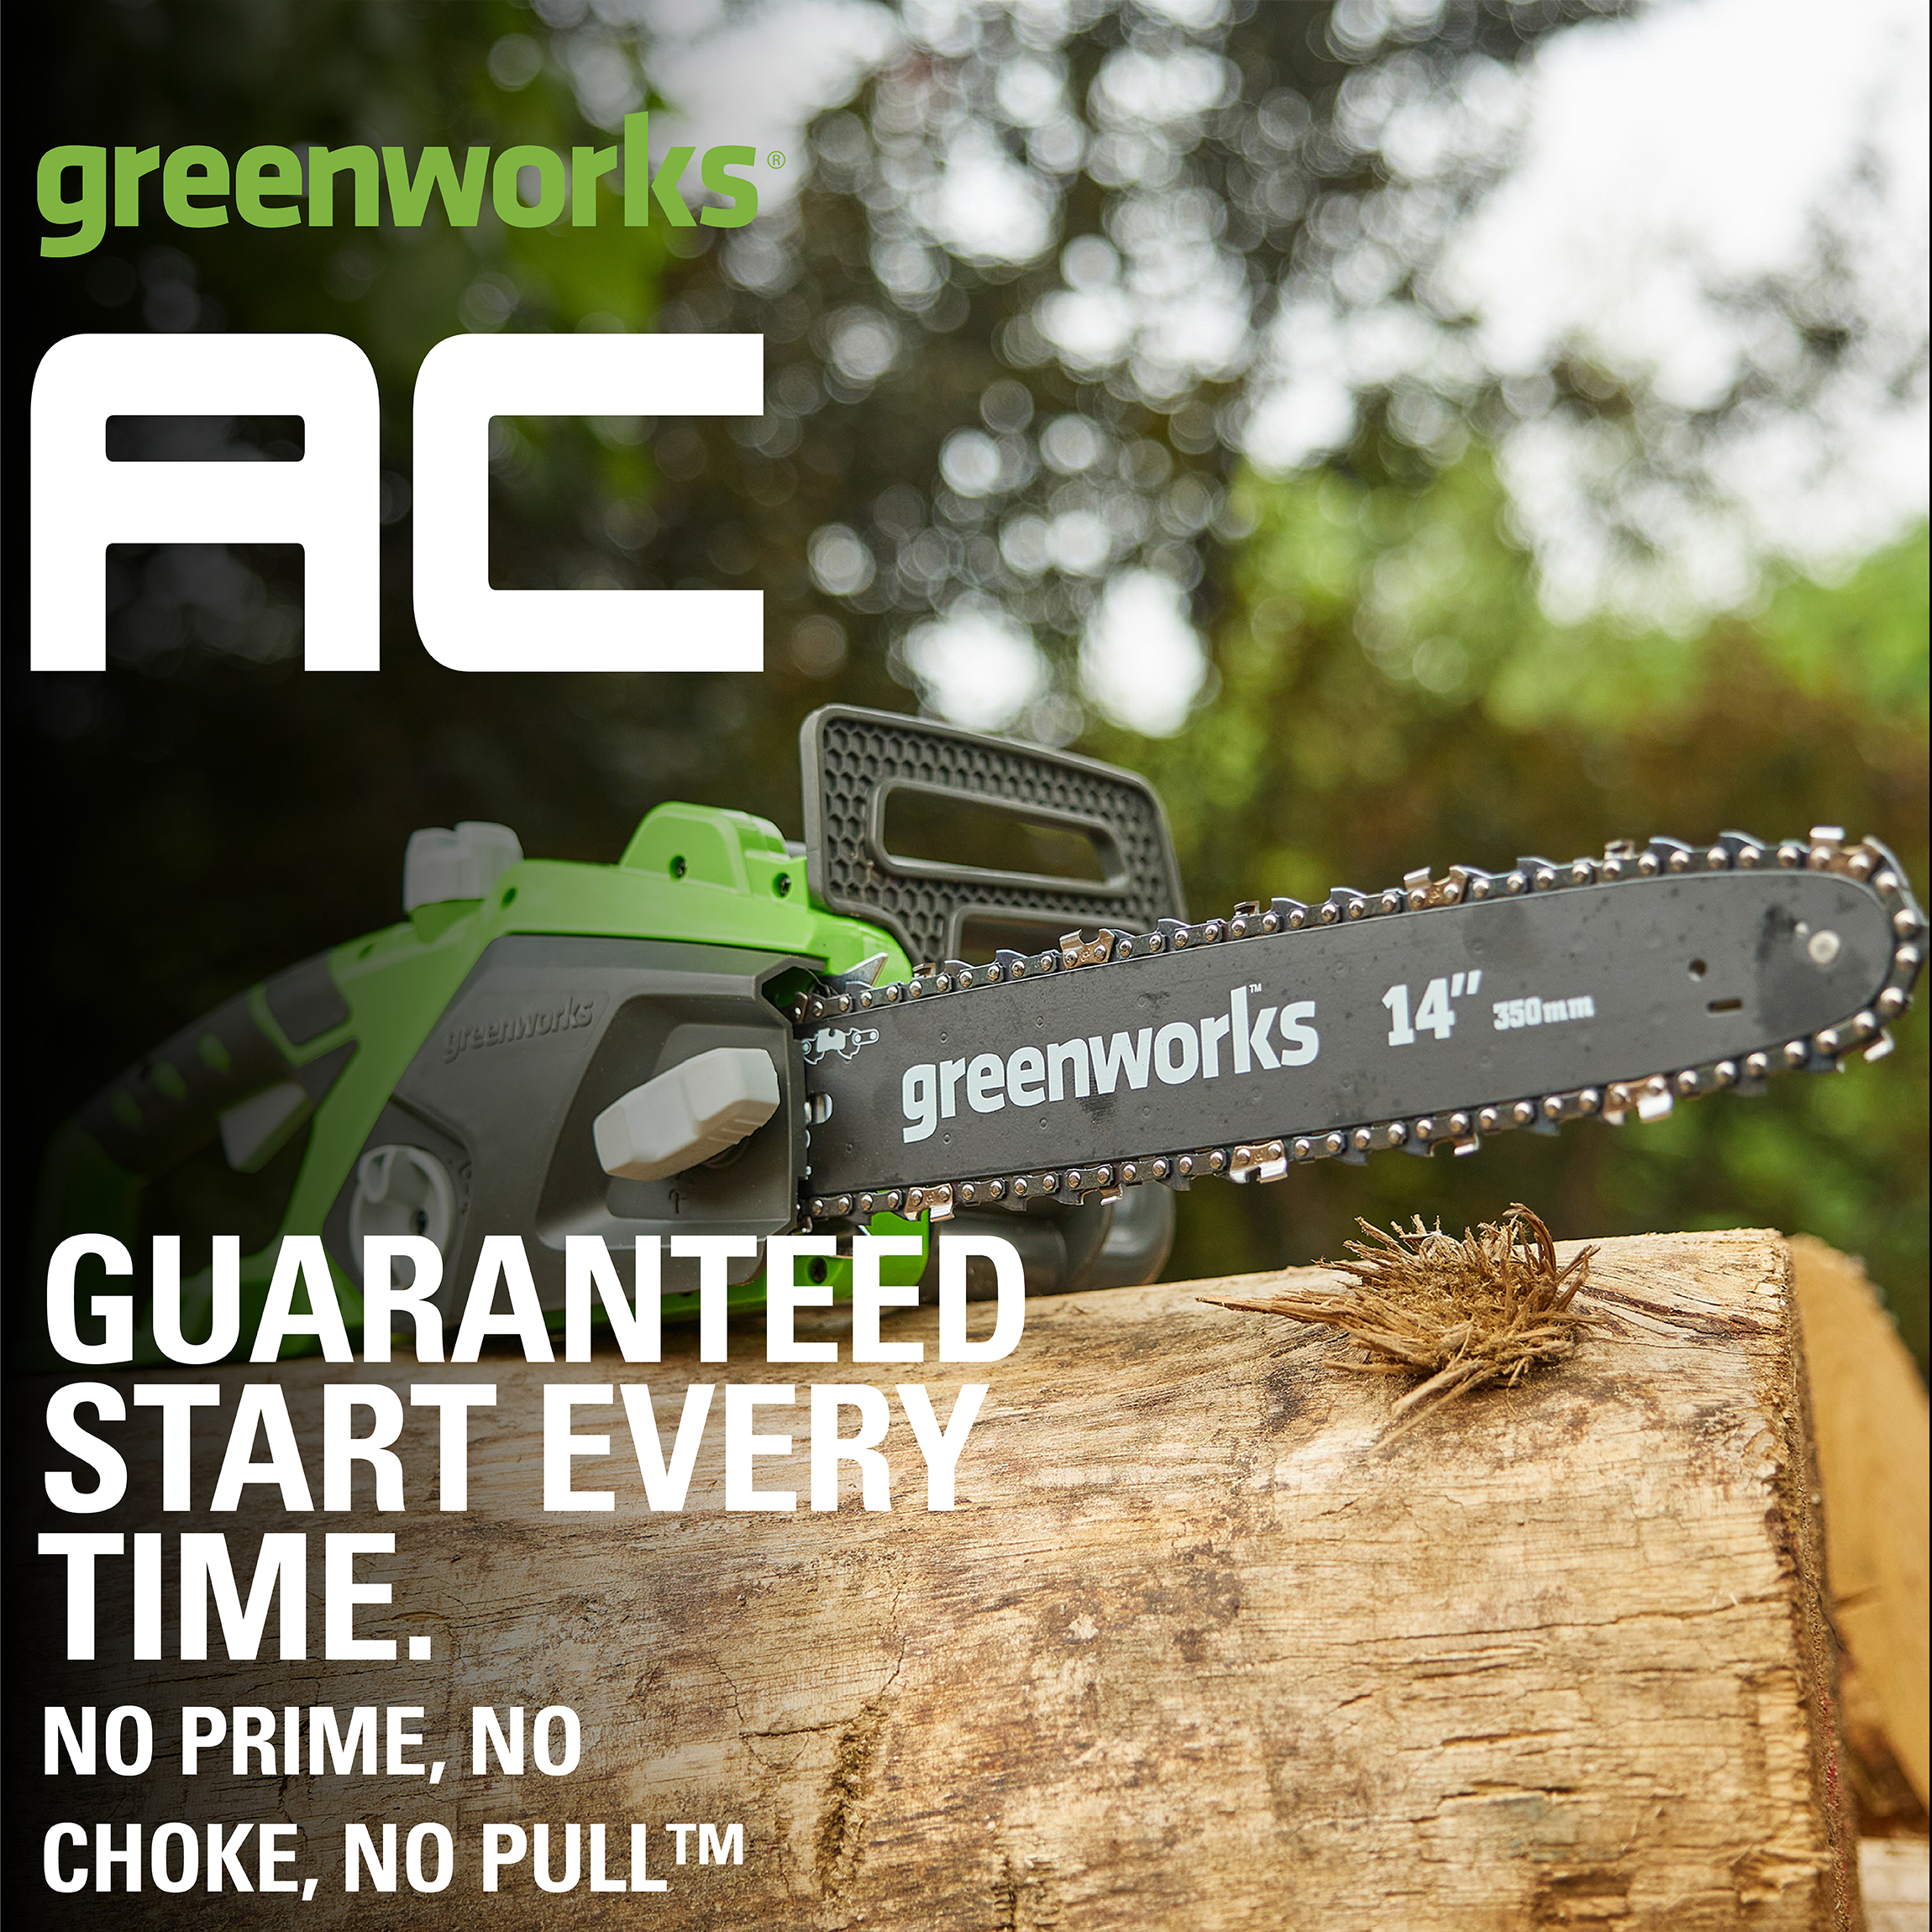 Greenworks 14" Corded Electric 10.5 Amp Chainsaw 20222 - image 4 of 11